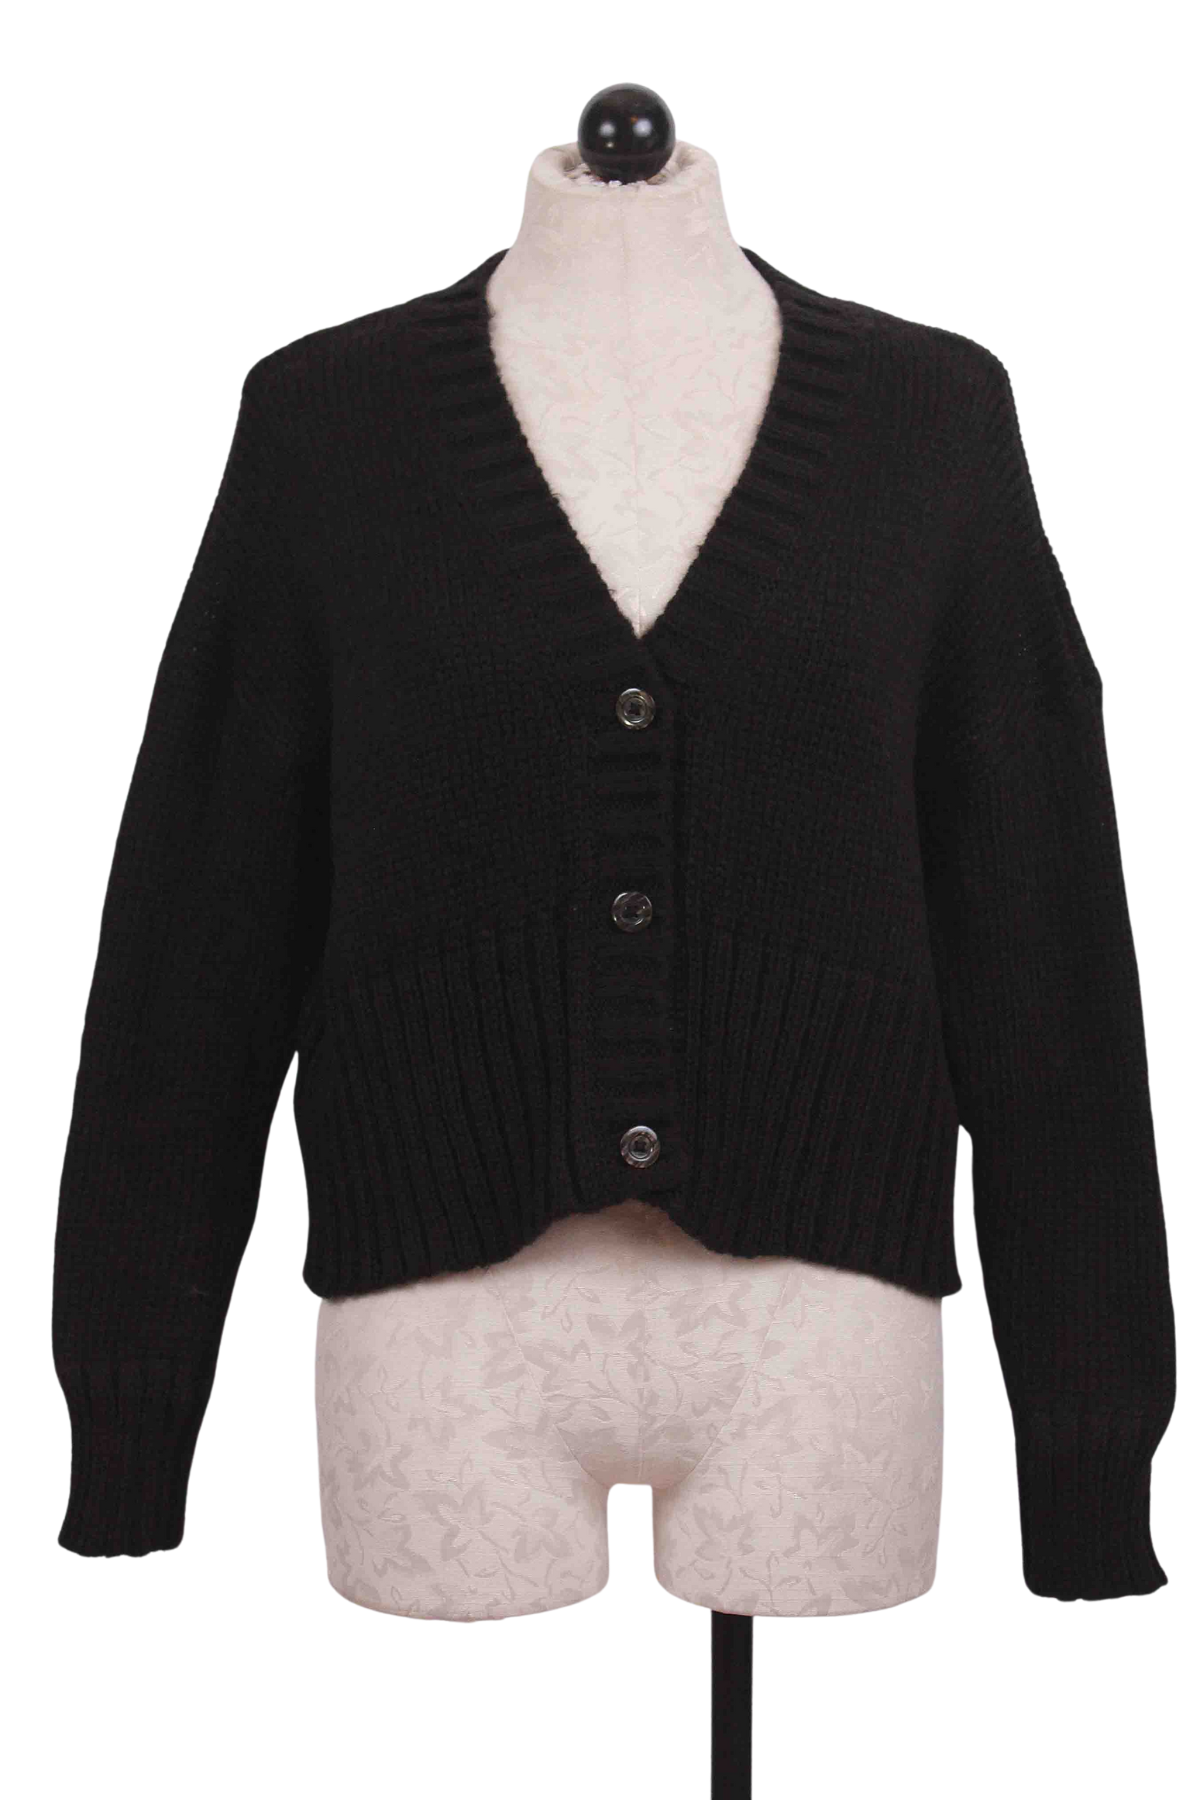 black Jac Cropped Cardi by Wooden Ships